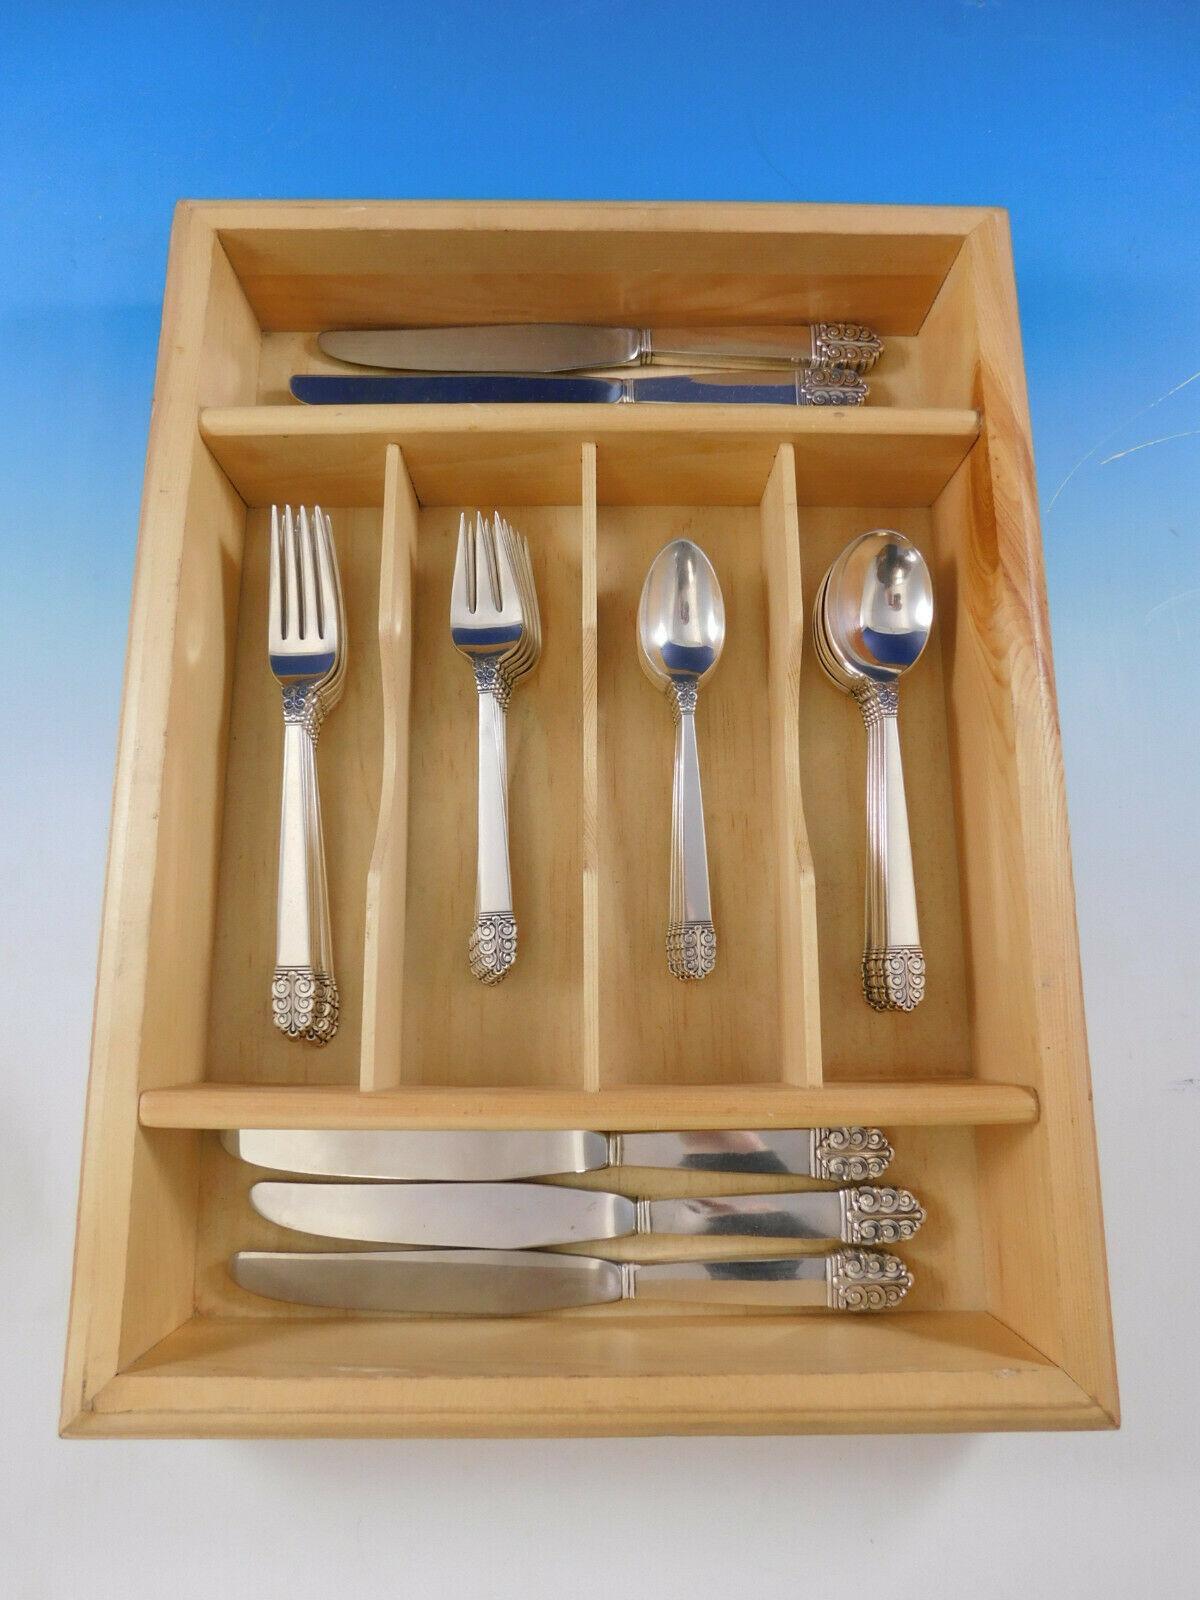 Mid-Century Modern Northern Lights by International glossy Sterling silver flatware set, 30 pieces. This set includes:

6 knives, 8 7/8